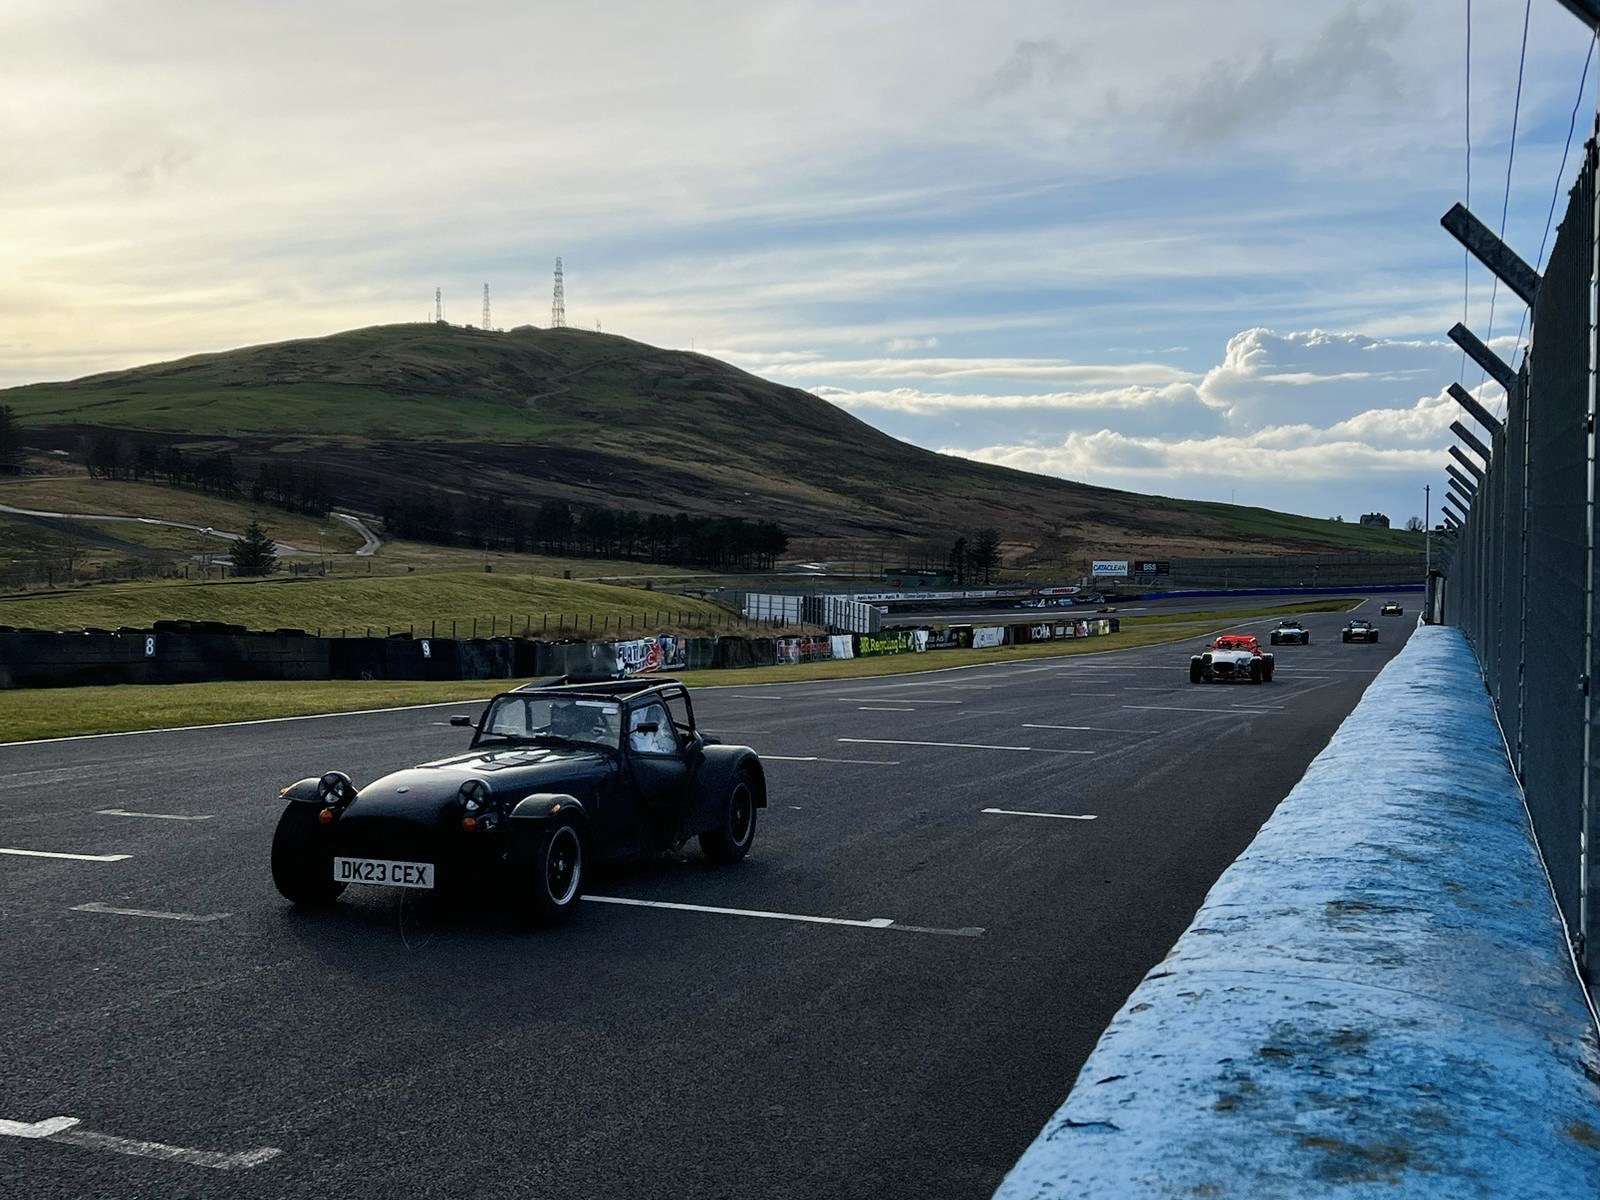 The pit straight going clockwise at Knockhill Circuit.